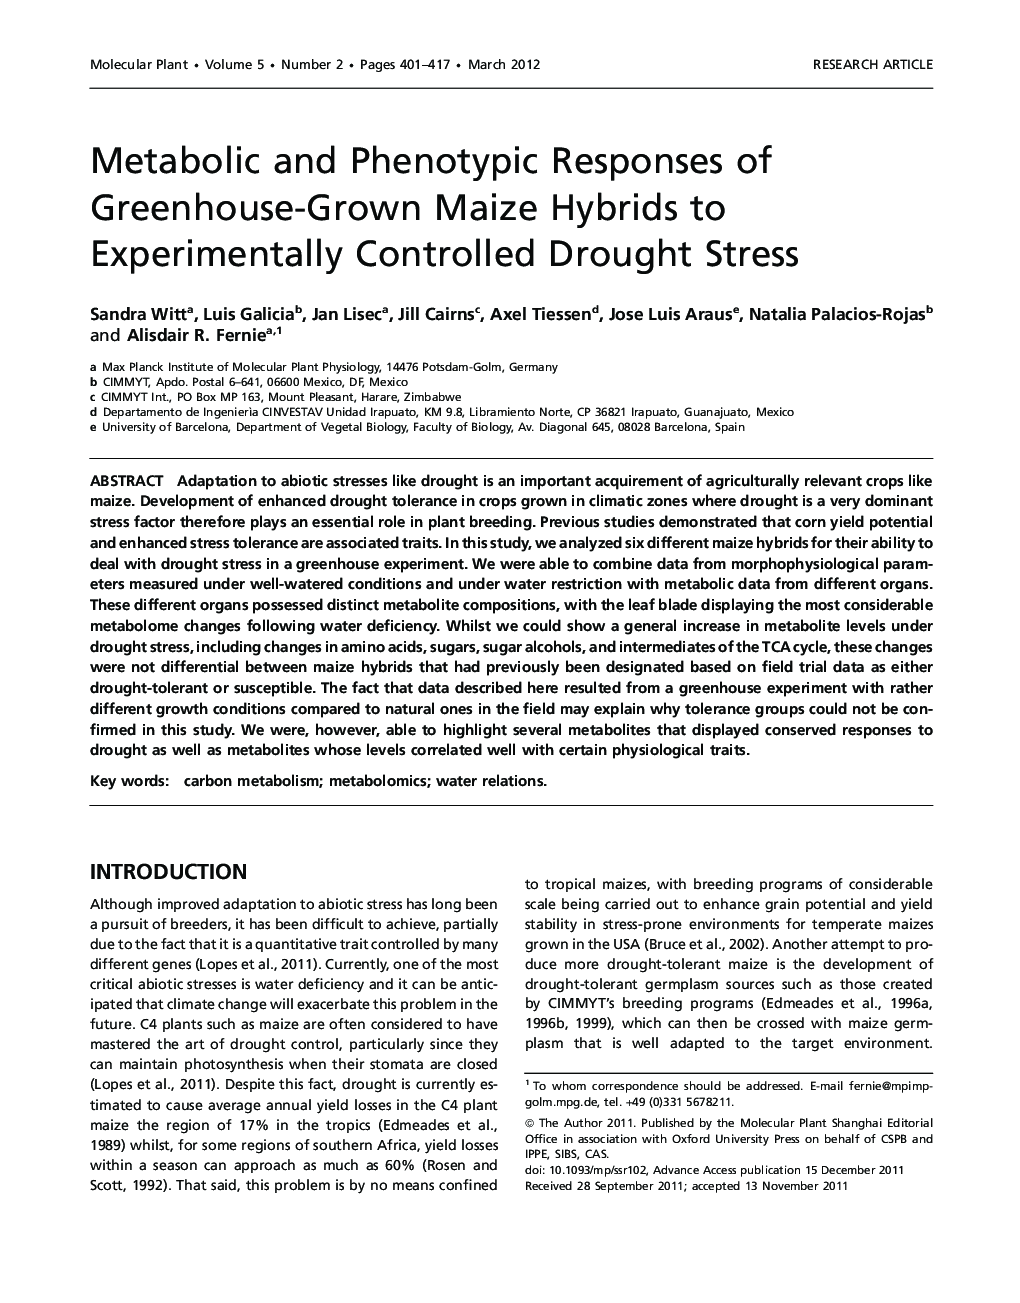 Metabolic and Phenotypic Responses of Greenhouse-Grown Maize Hybrids to Experimentally Controlled Drought Stress 